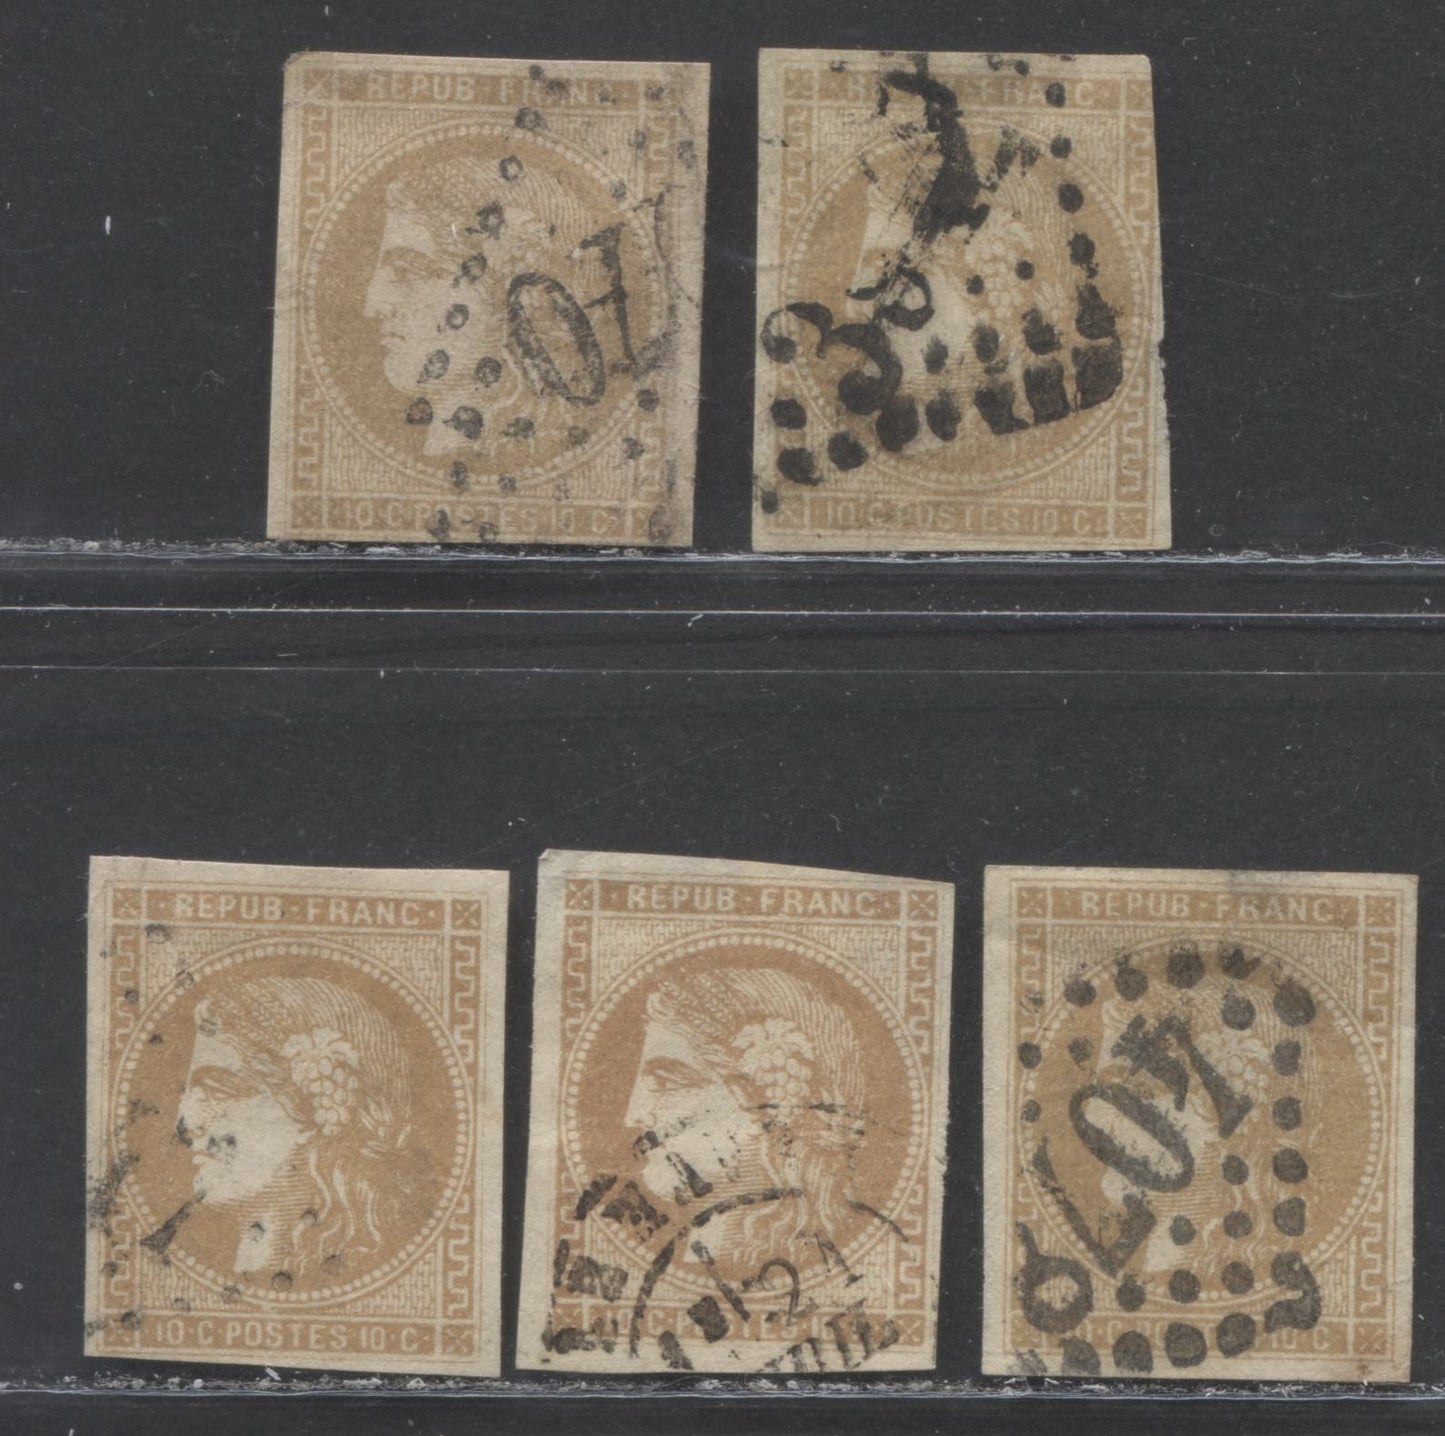 Lot 362 France SC#42 10c Bistre Brown 1870-1871 Imperf Bordeaux Definitive Issue, An Ungraded Shade Lot of 5 Examples, 2022 Scott Classic Cat. $300 USD, Net. Est. $30, Click on Listing to See ALL Pictures